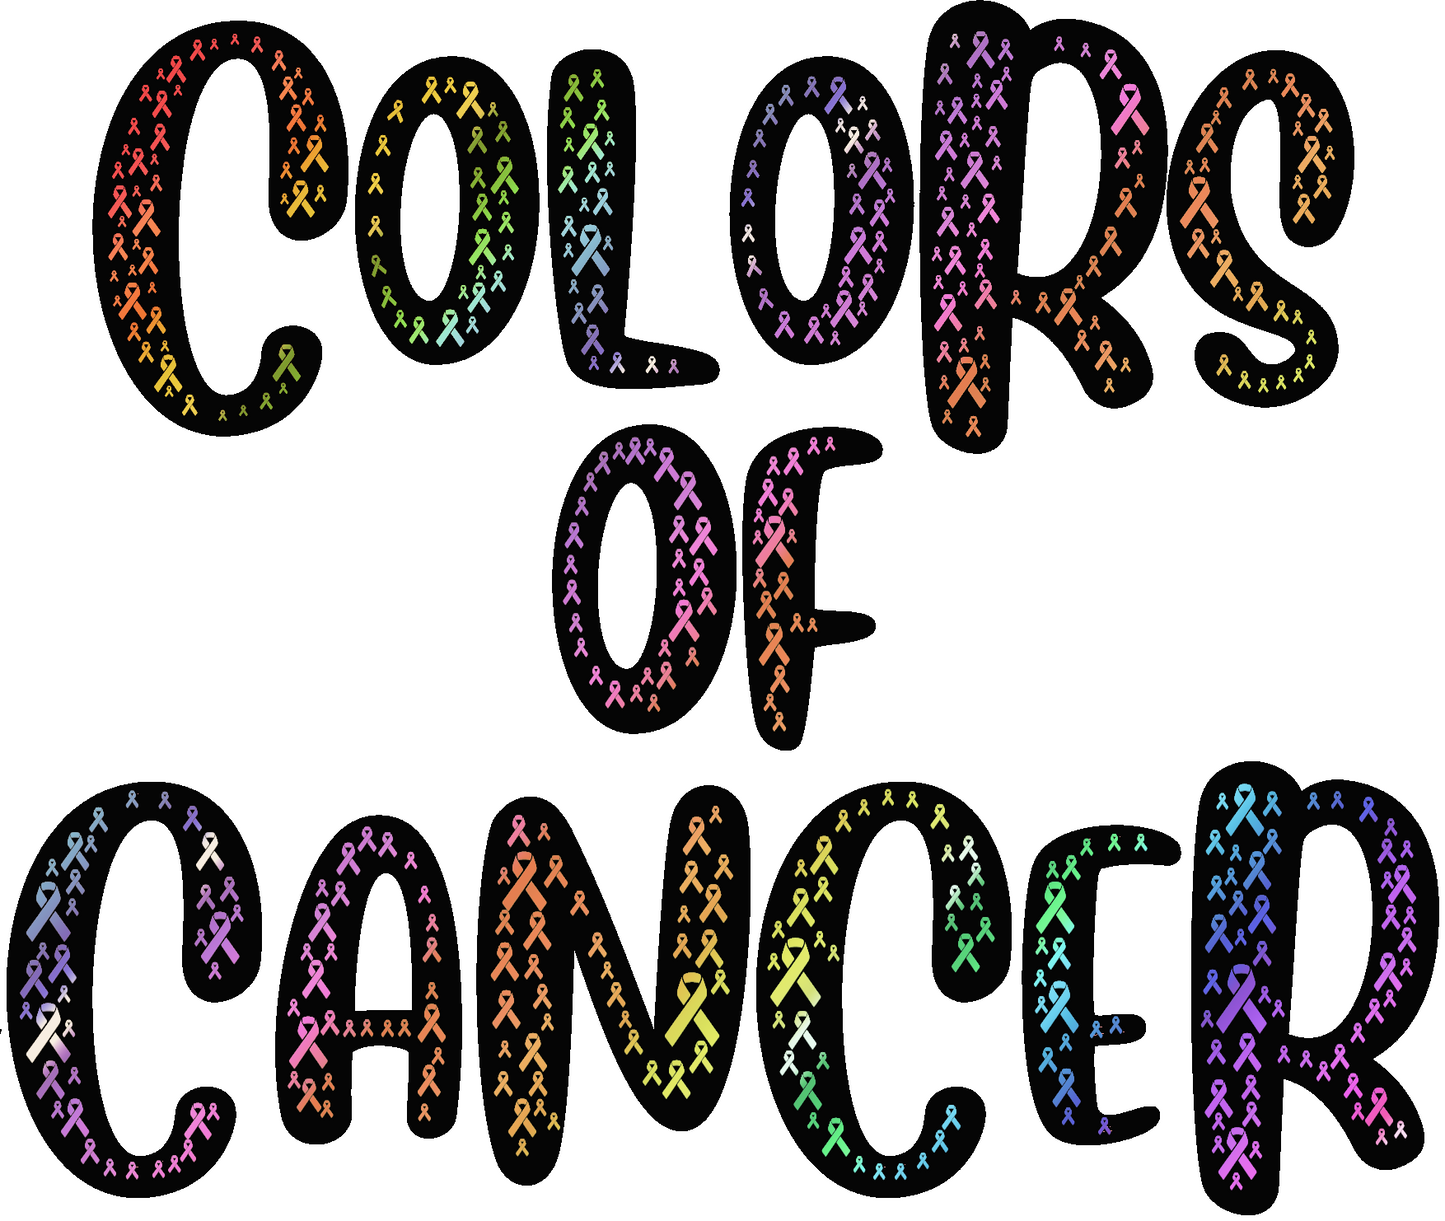 Colors of Cancer